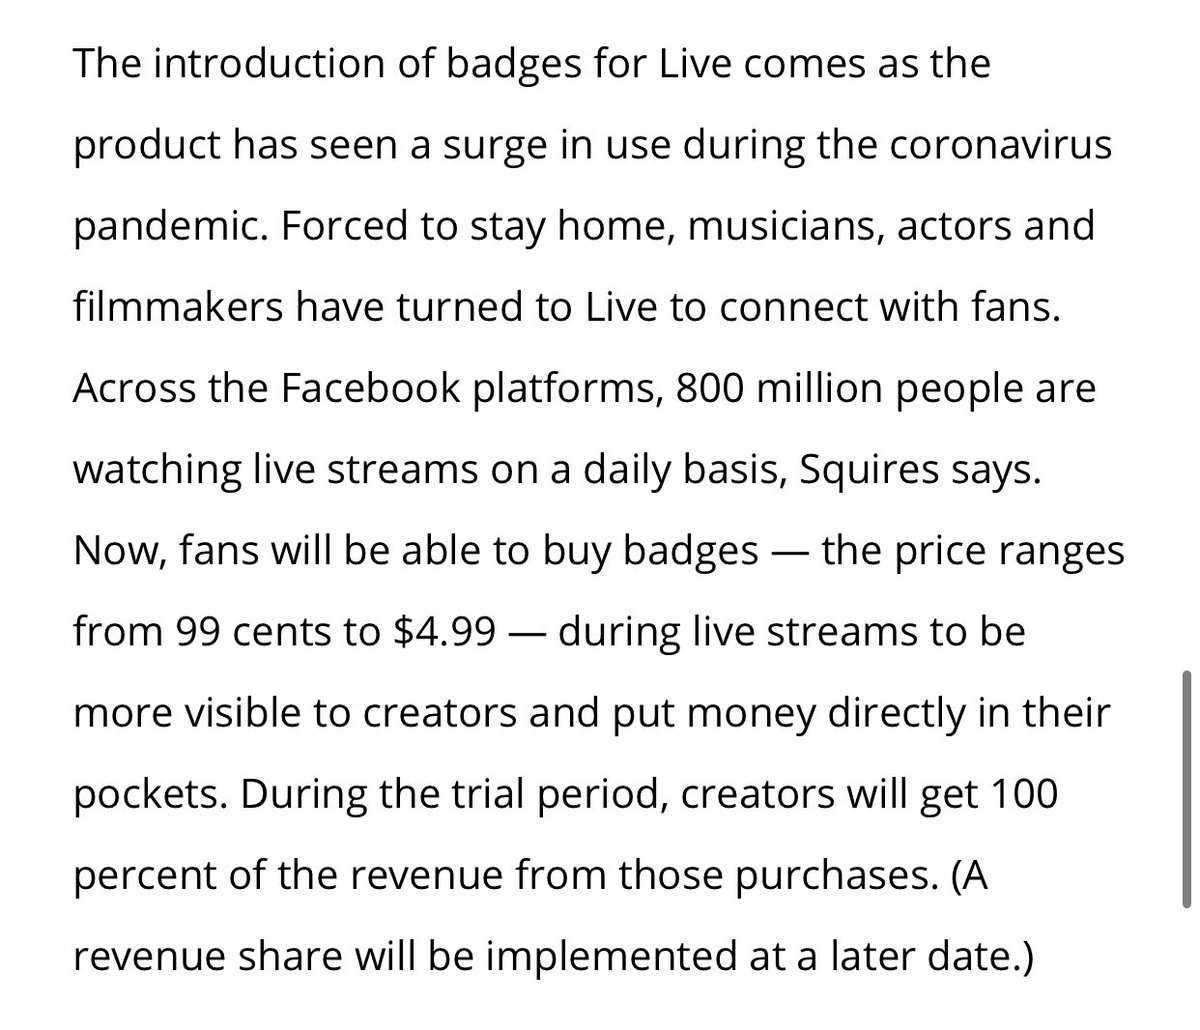 On top of that IG is also bringing badges fans will be able to purchase and use during live streams to show support to their fave acts.Creators would be keeping 100% of the revenue during test period before a split happens. Way to go IG !